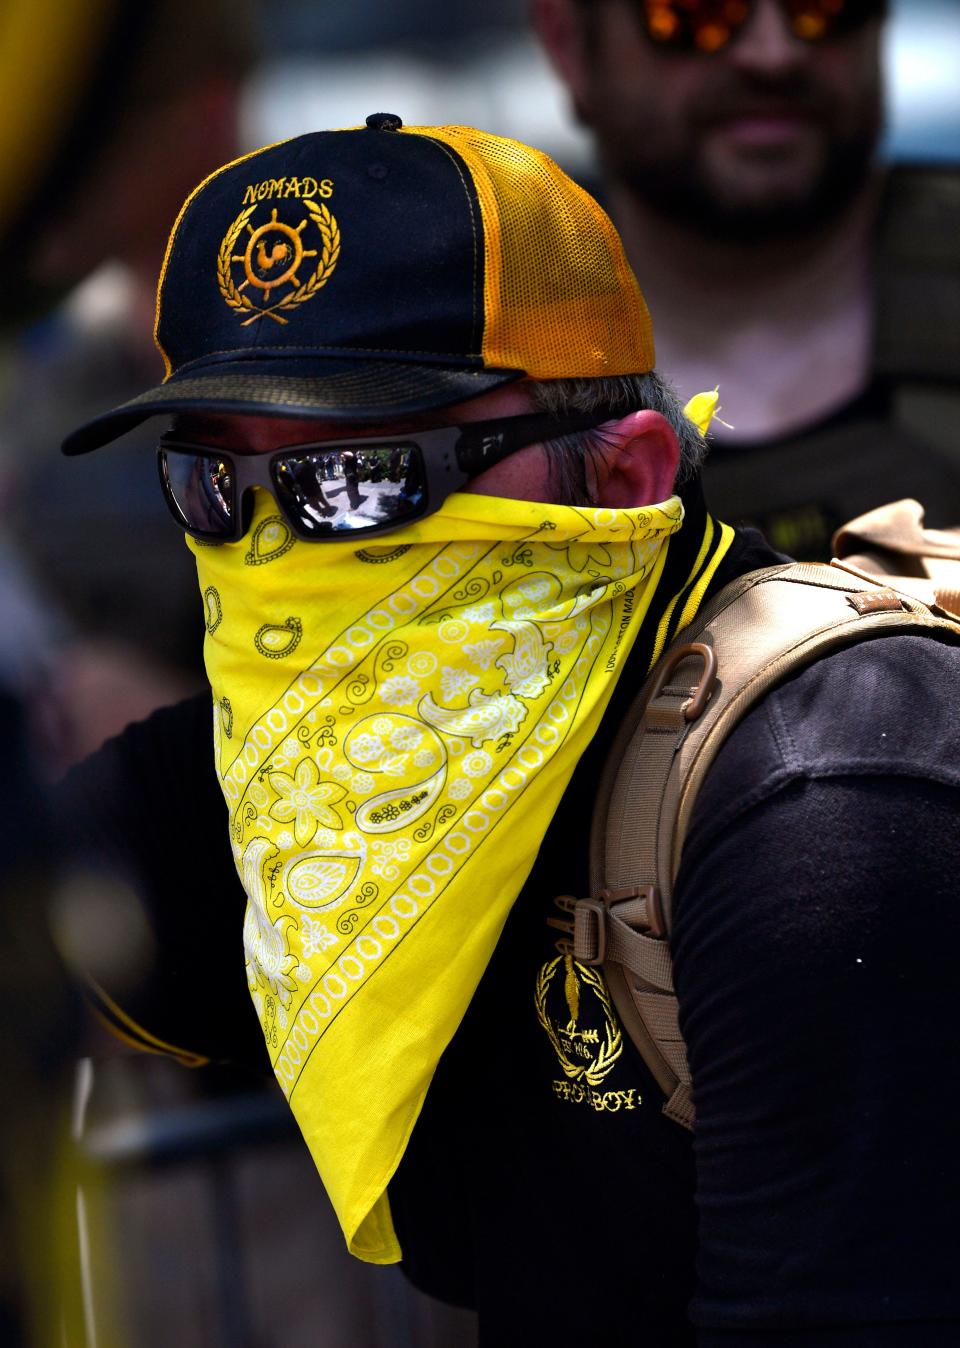 May 28, 2022; Houston, TX, USA; A member of the South Texas Proud Boys watches as police keep separate his group from the anti-gun demonstrators outside the George R. Brown Convention Center where the NRA was holding the second day of its national convention in Houston, Texas on Saturday May 28, 2022.